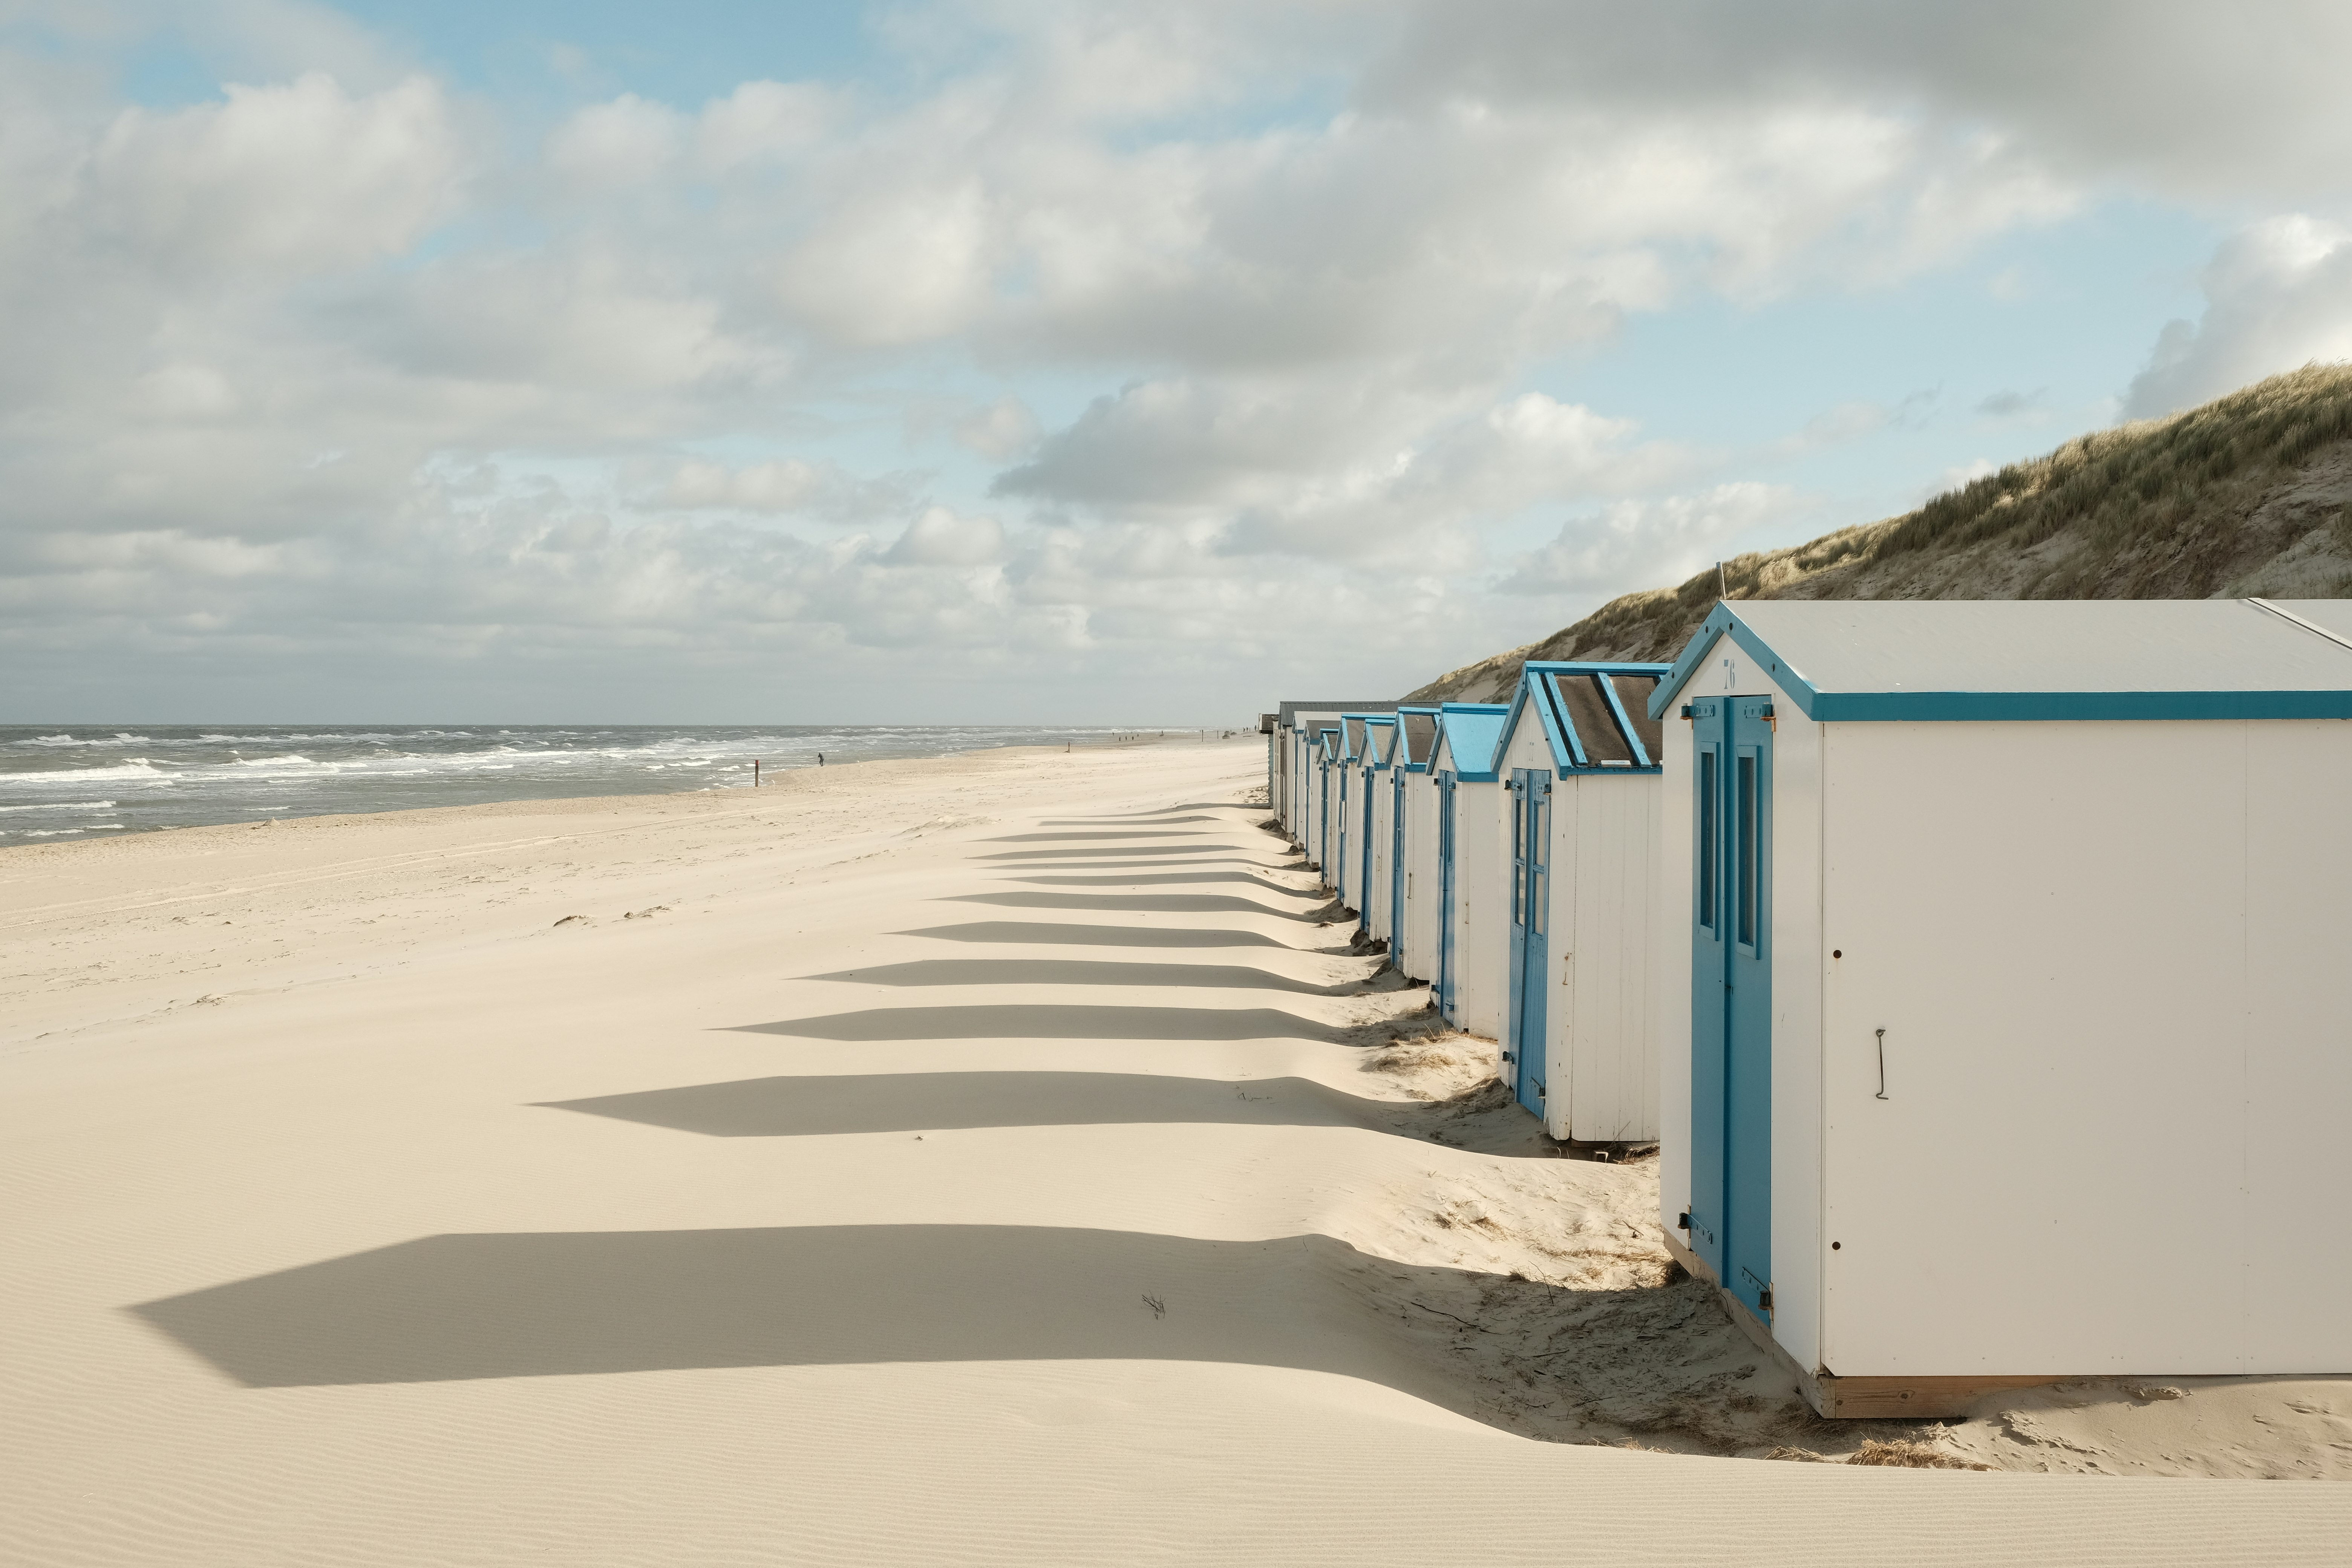 beach houses on the beach of Texel, NL, during a cloudy day with dramatic shadows.